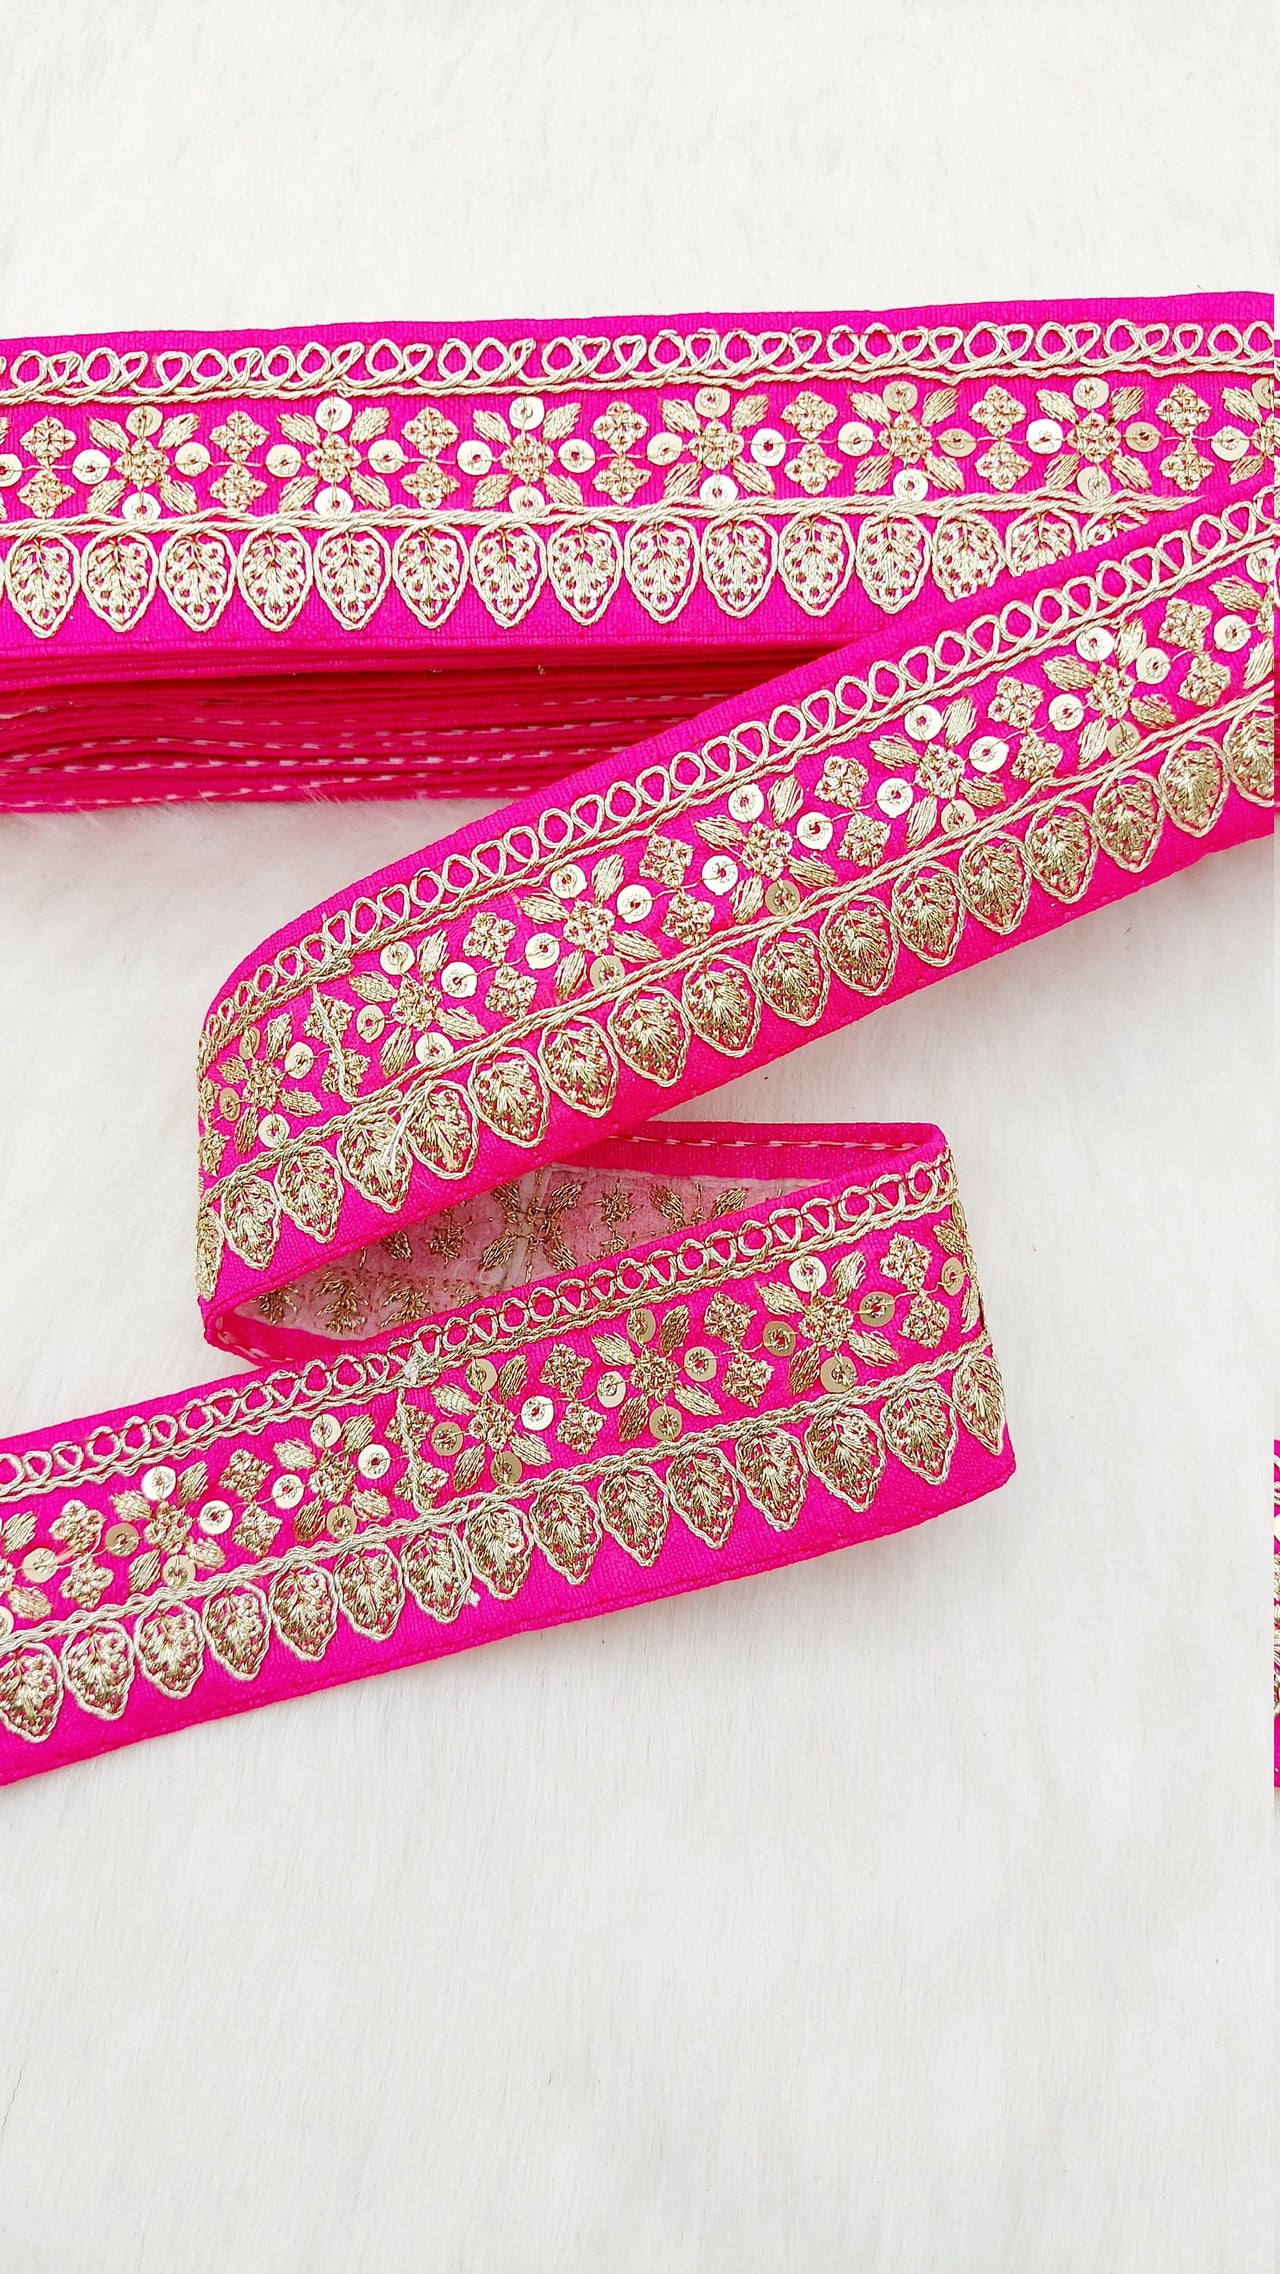 Fuchsia Pink Art Silk Fabric Trim With Gold Floral Embroidery, Floral Sequins Sari Border, Trim By 9 Yards